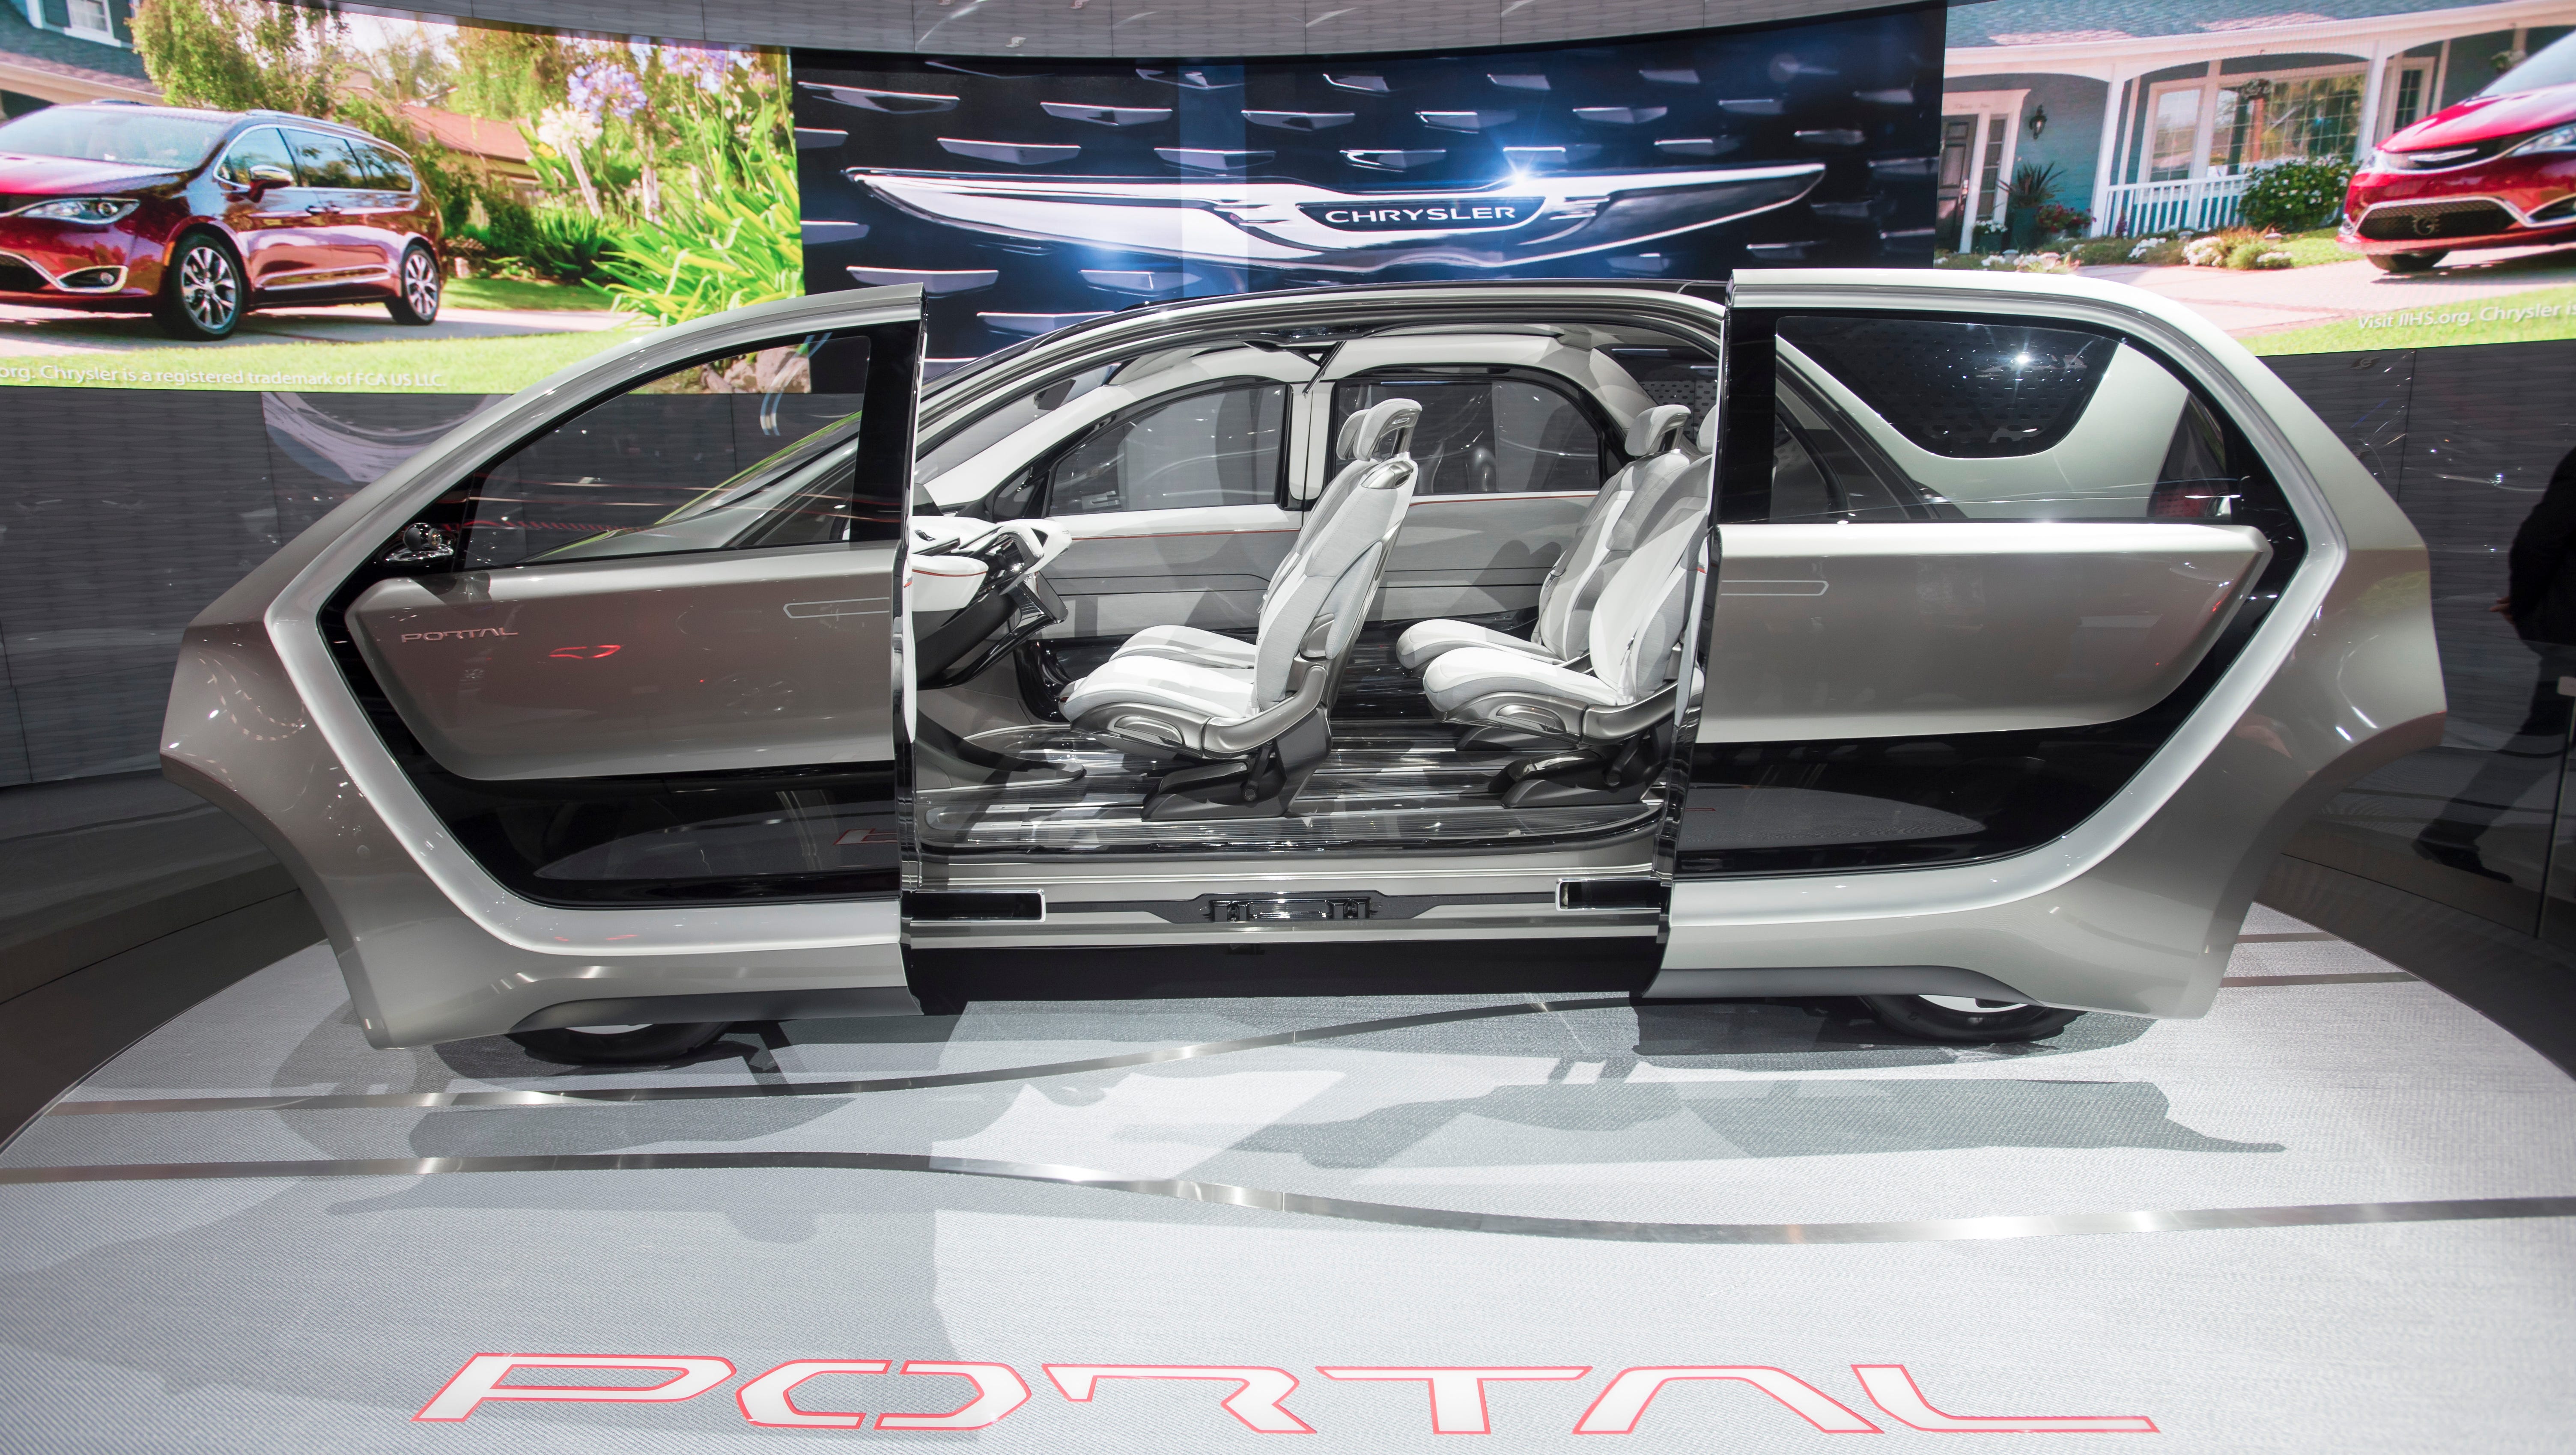 The Chrysler Portal concept's doors are opened.